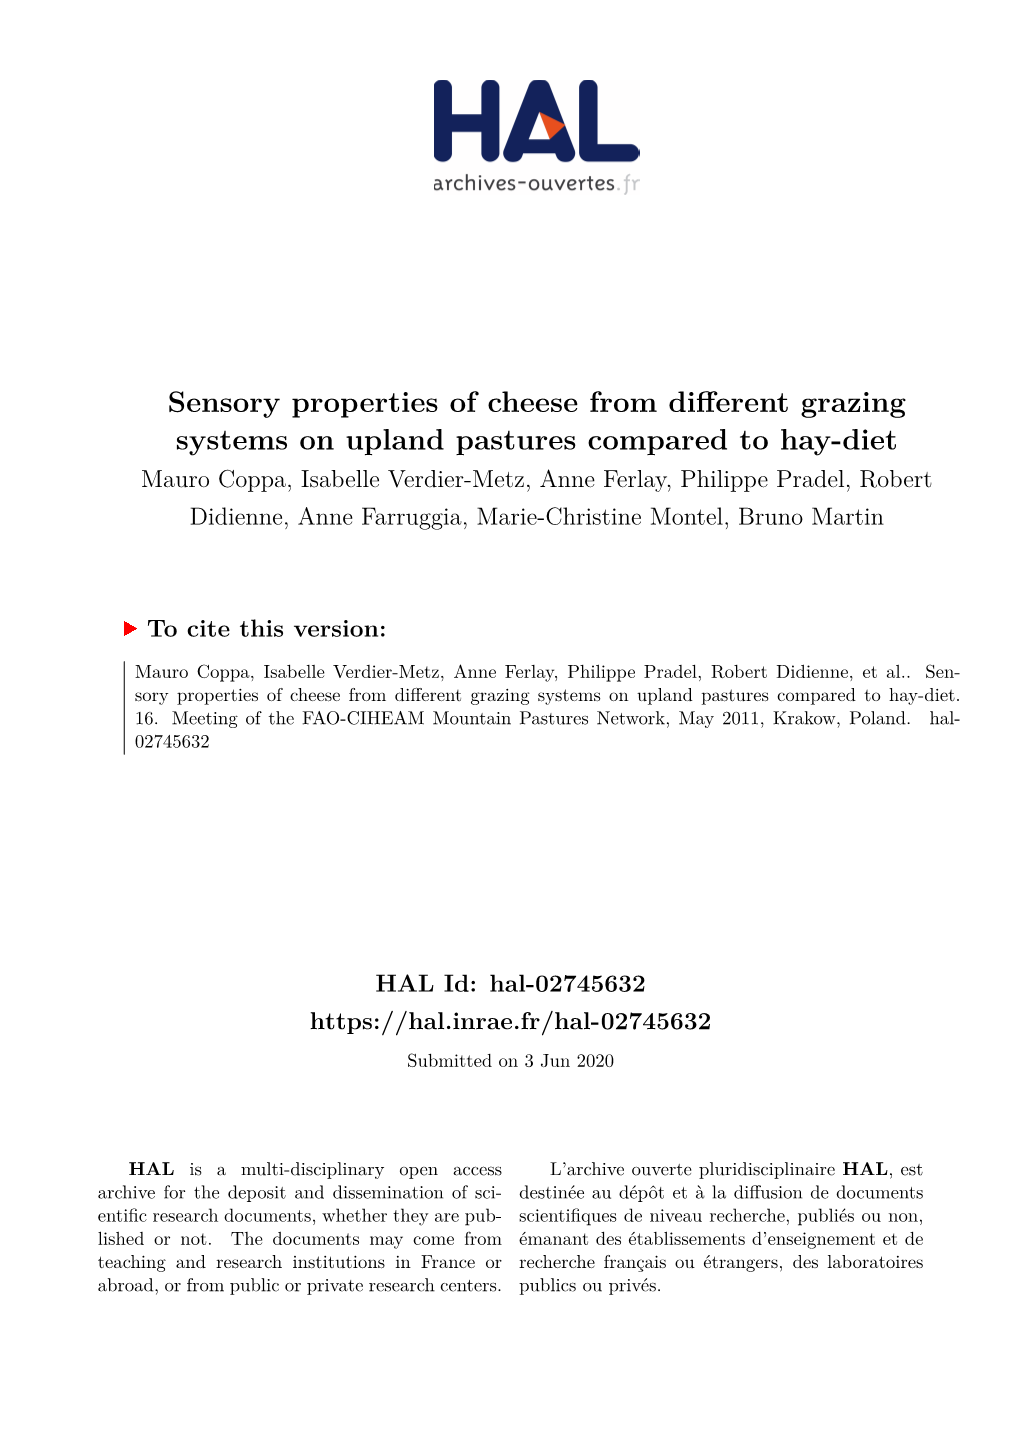 Sensory Properties of Cheese from Different Grazing Systems on Upland